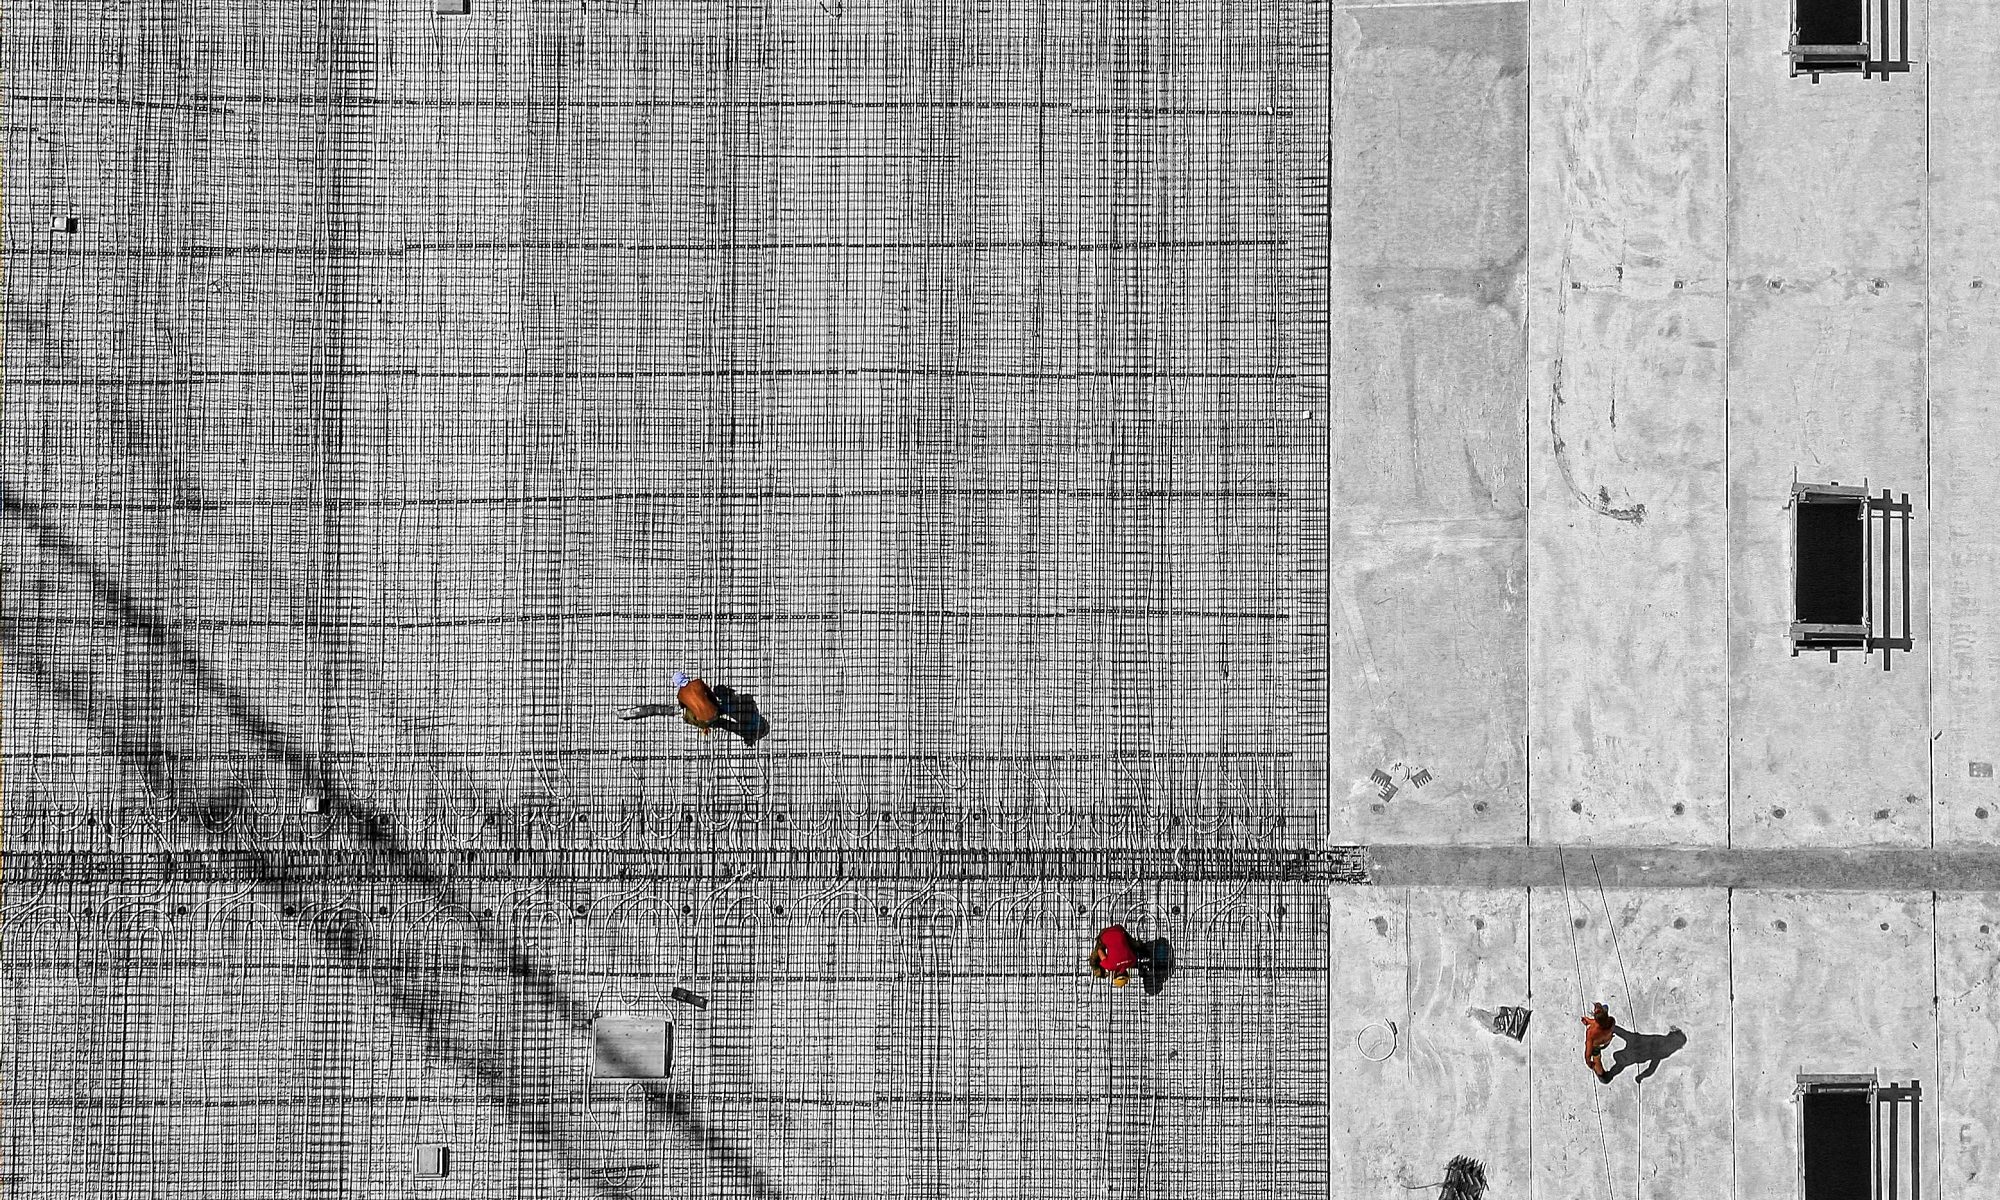 Workers on a concrete wall.